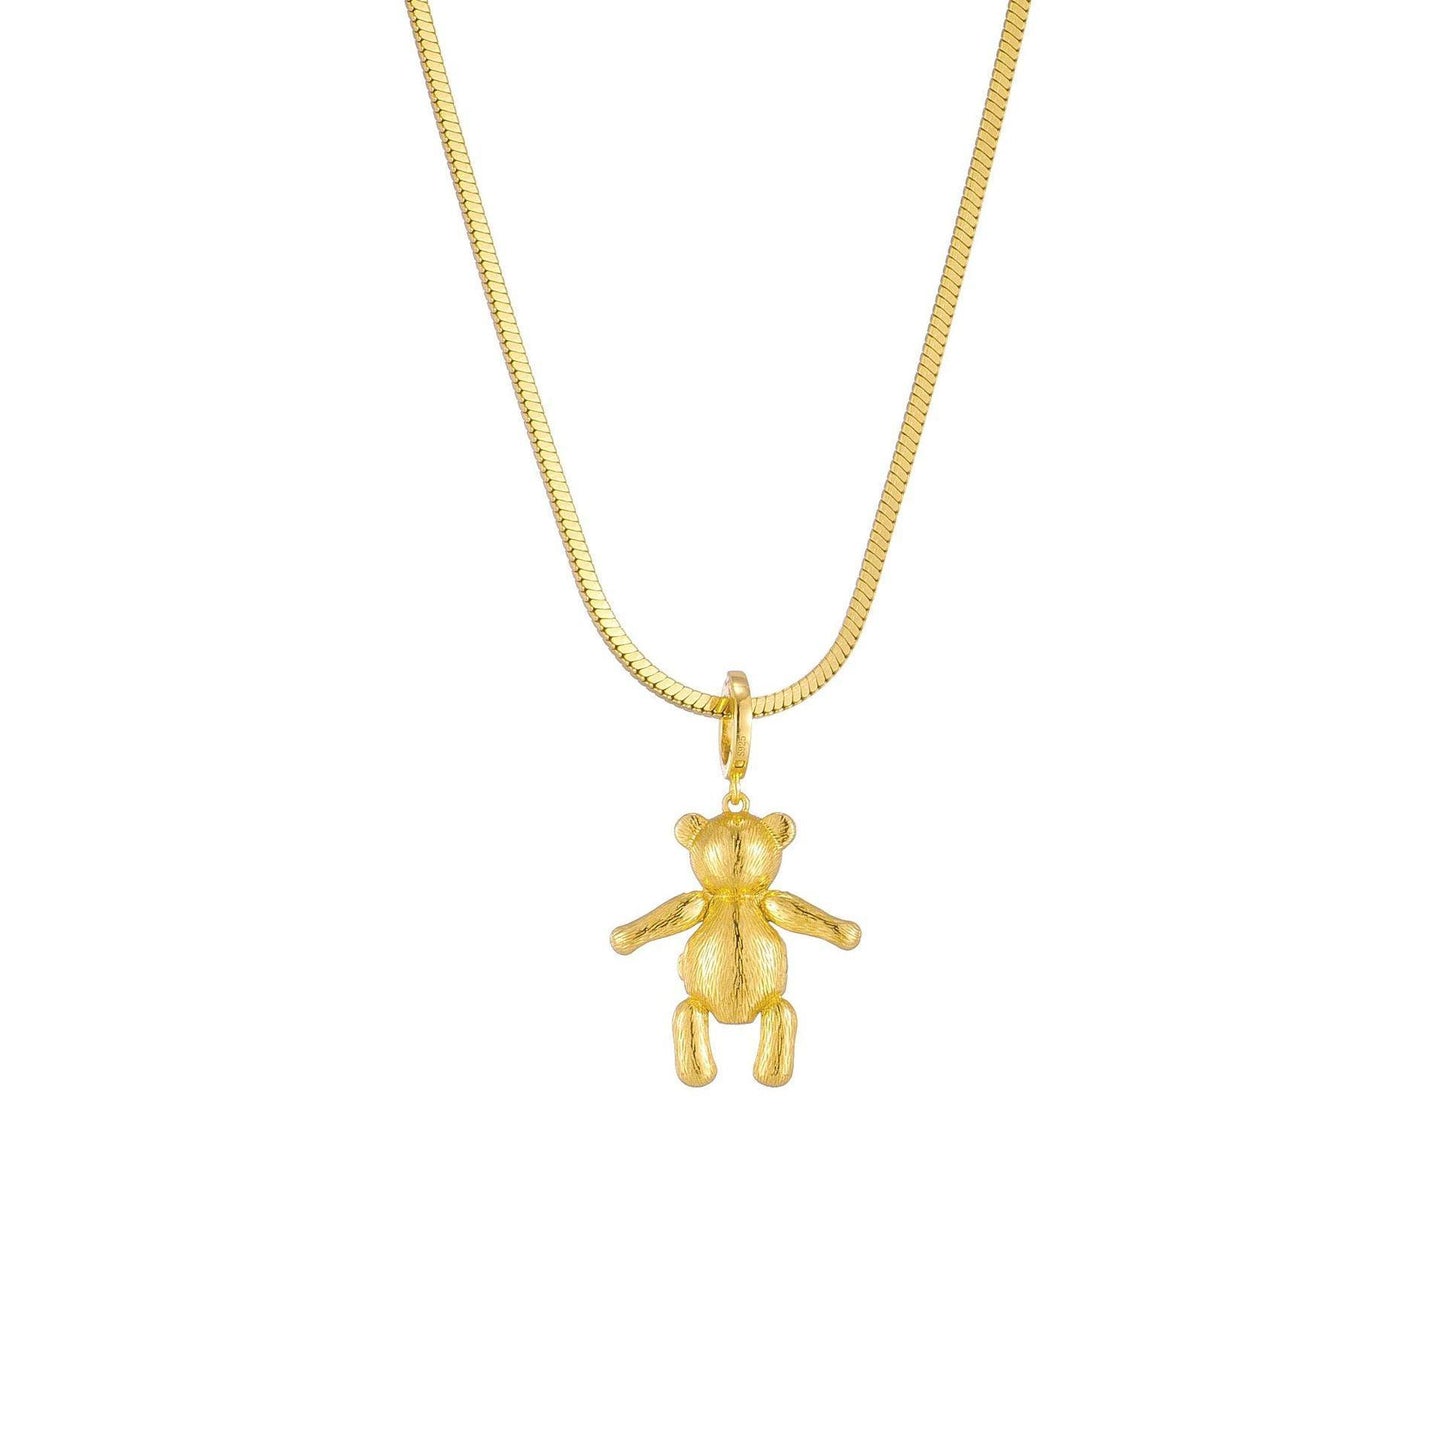 Fashionable New Cute Bear Pendant Necklace for Christmas 2023 | Fashionable New Cute Bear Pendant Necklace - undefined | Bear Necklace, Cute Bear Pendant Necklace, Gift Necklace, Necklaces | From Hunny Life | hunnylife.com